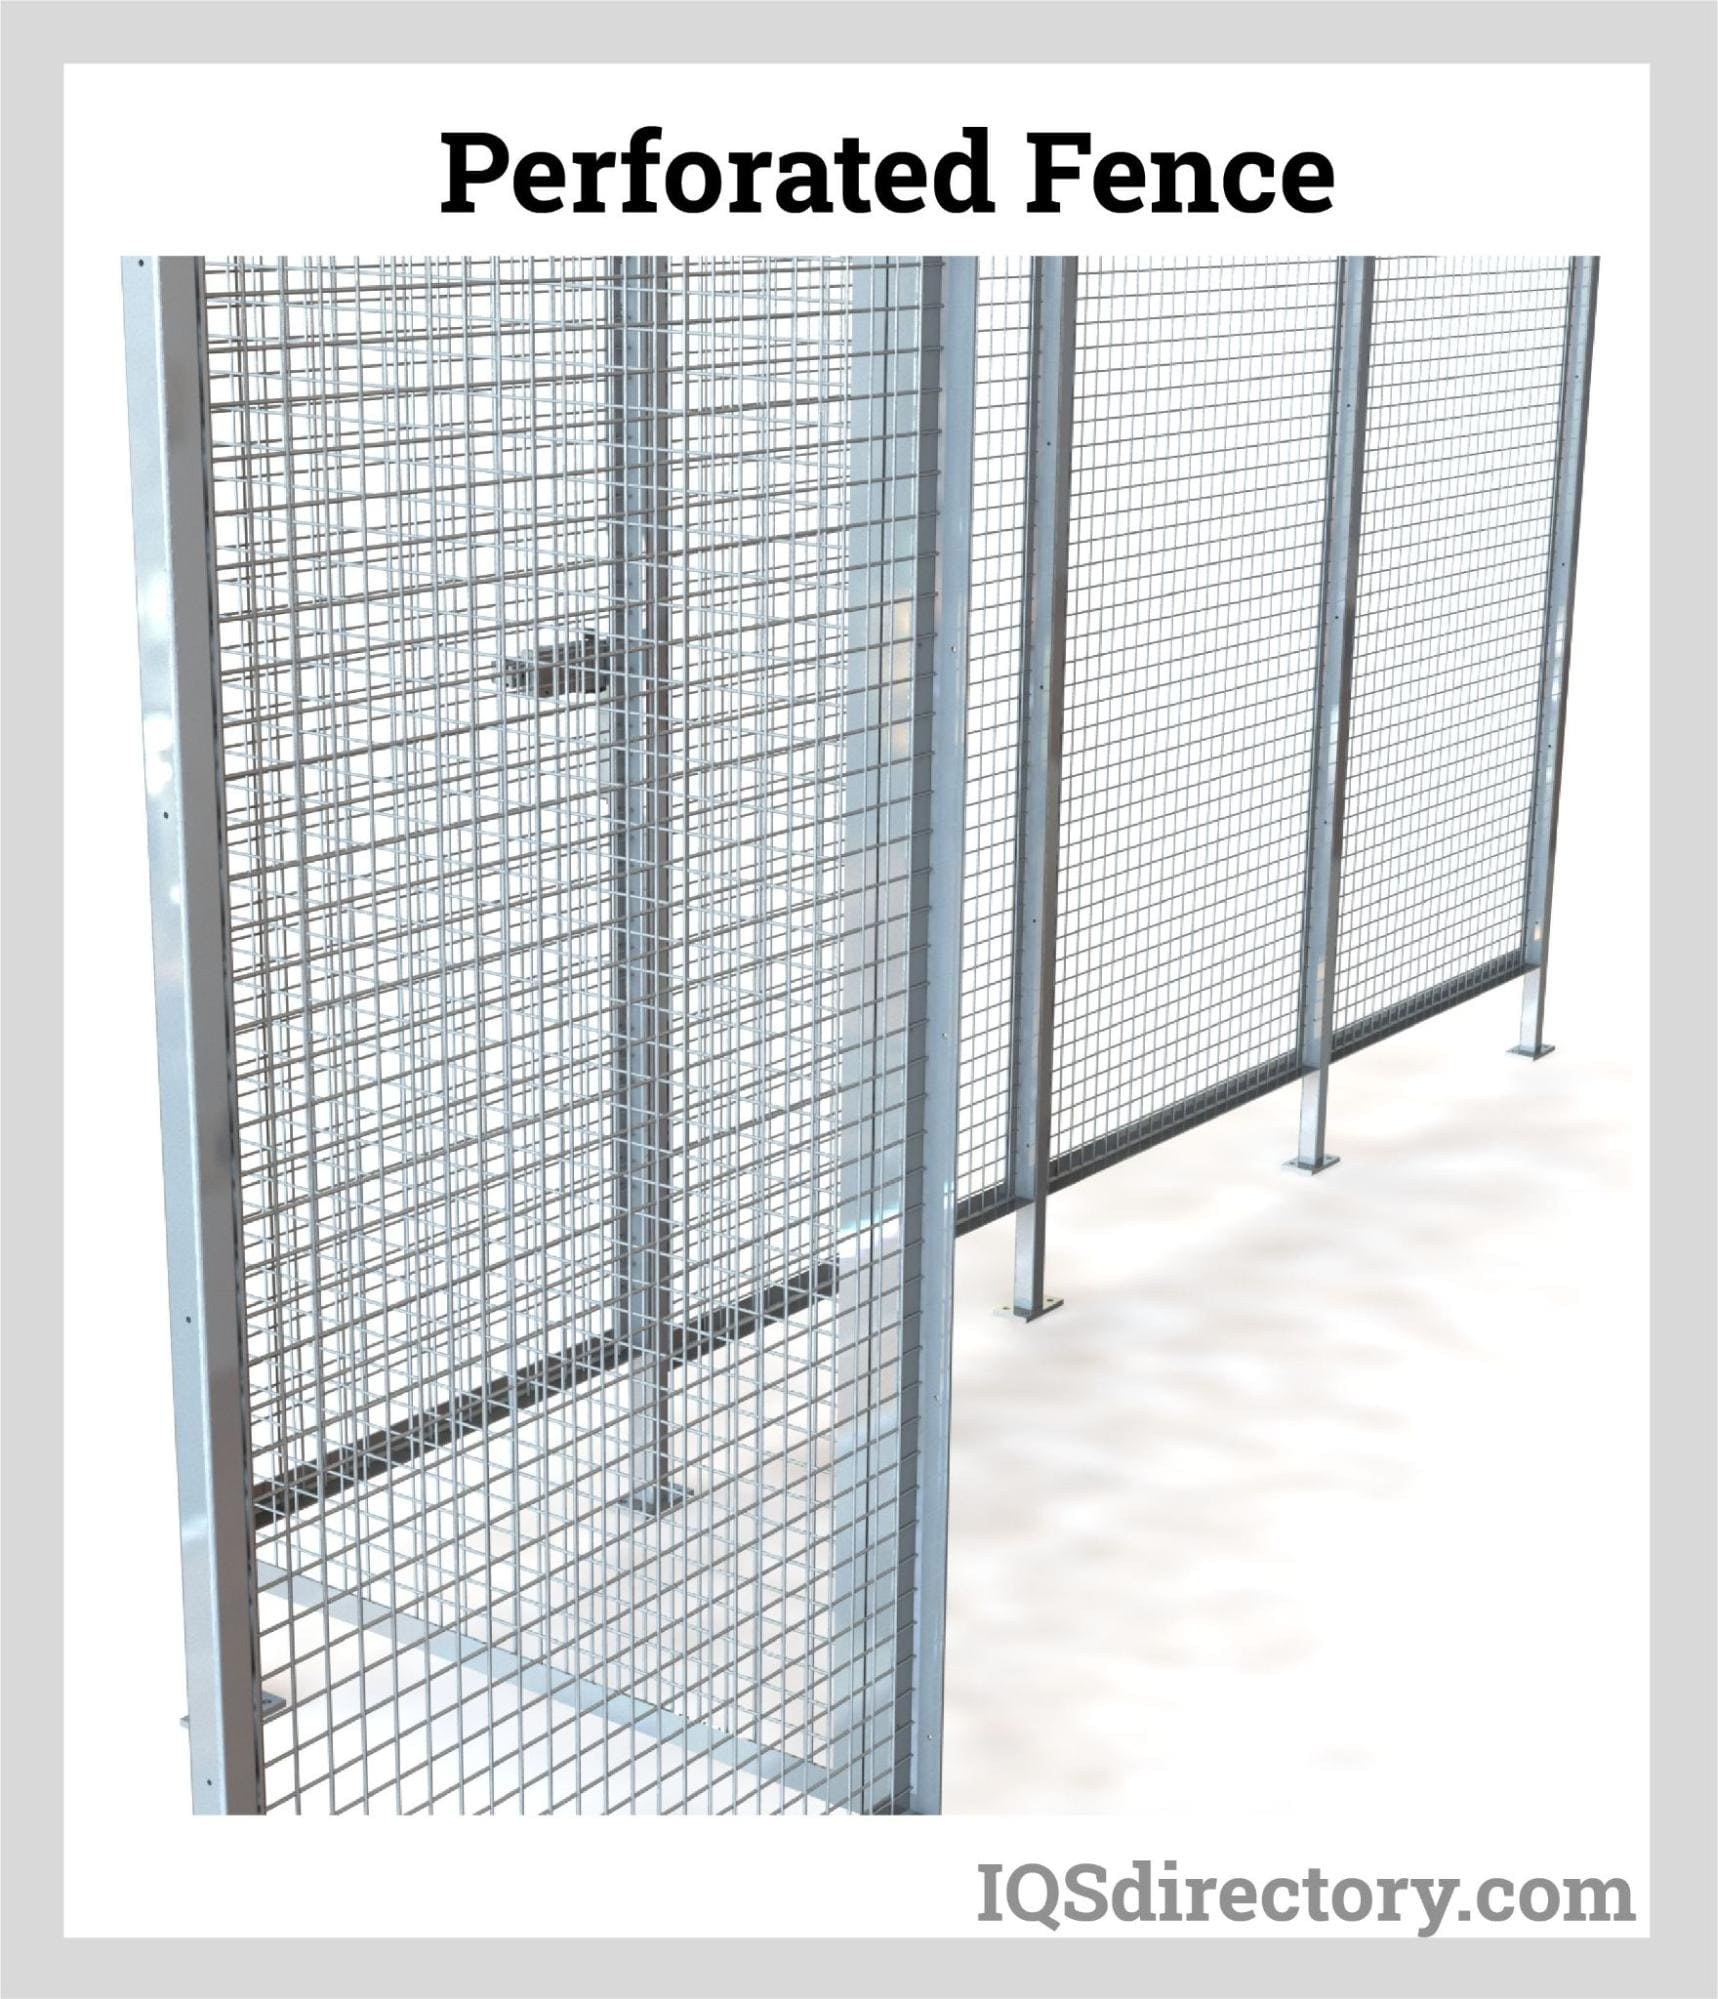 Perforated Fence